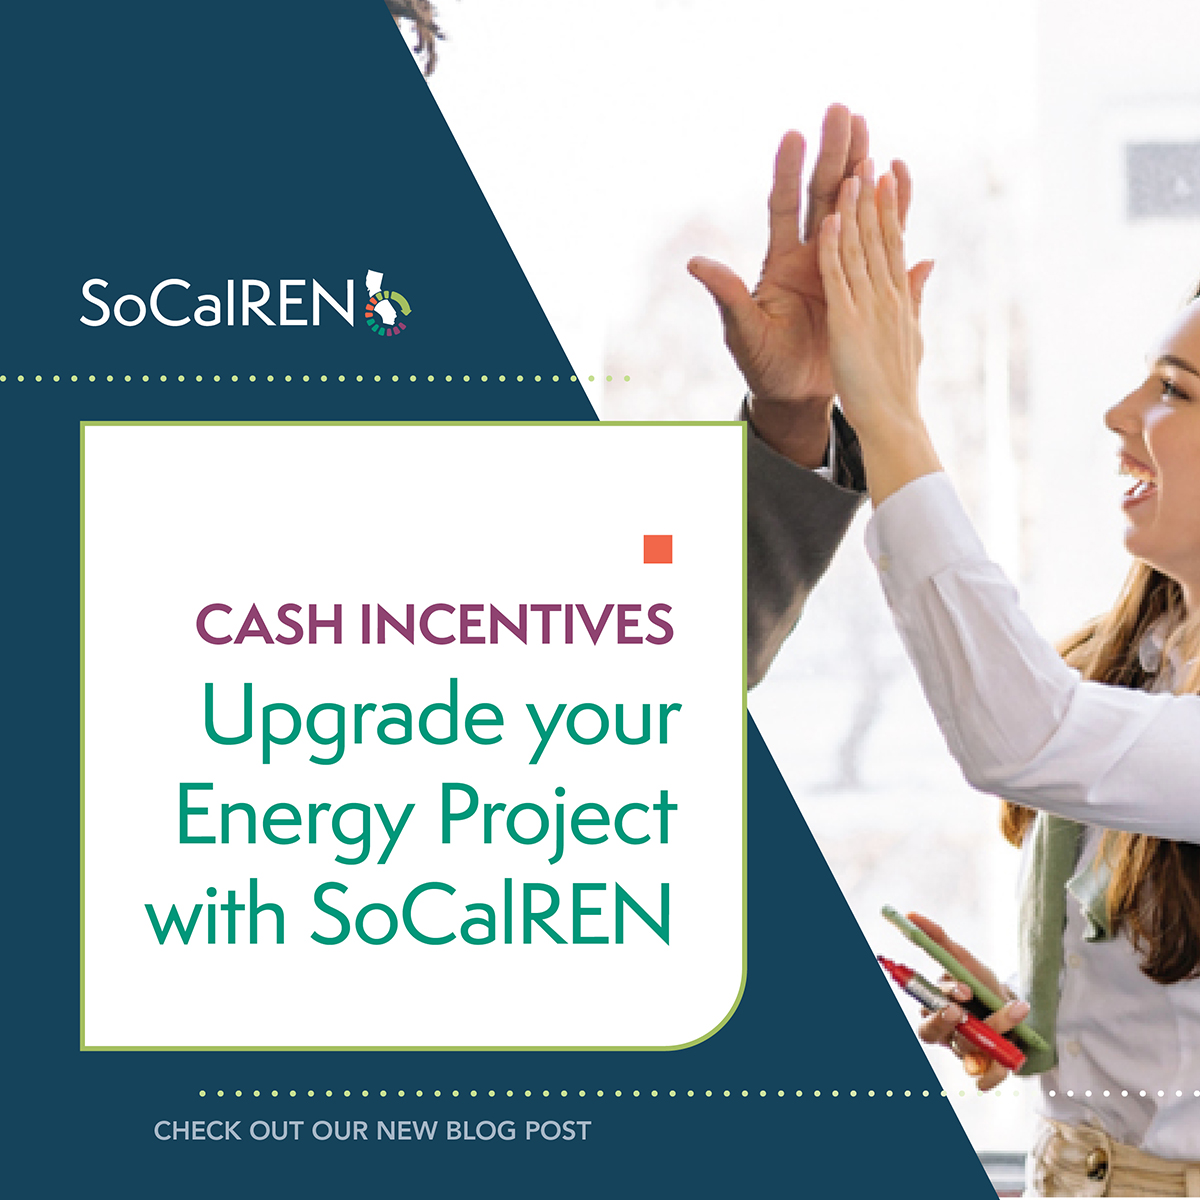 Upgrade your Energy Project with SoCalREN Cash Incentives